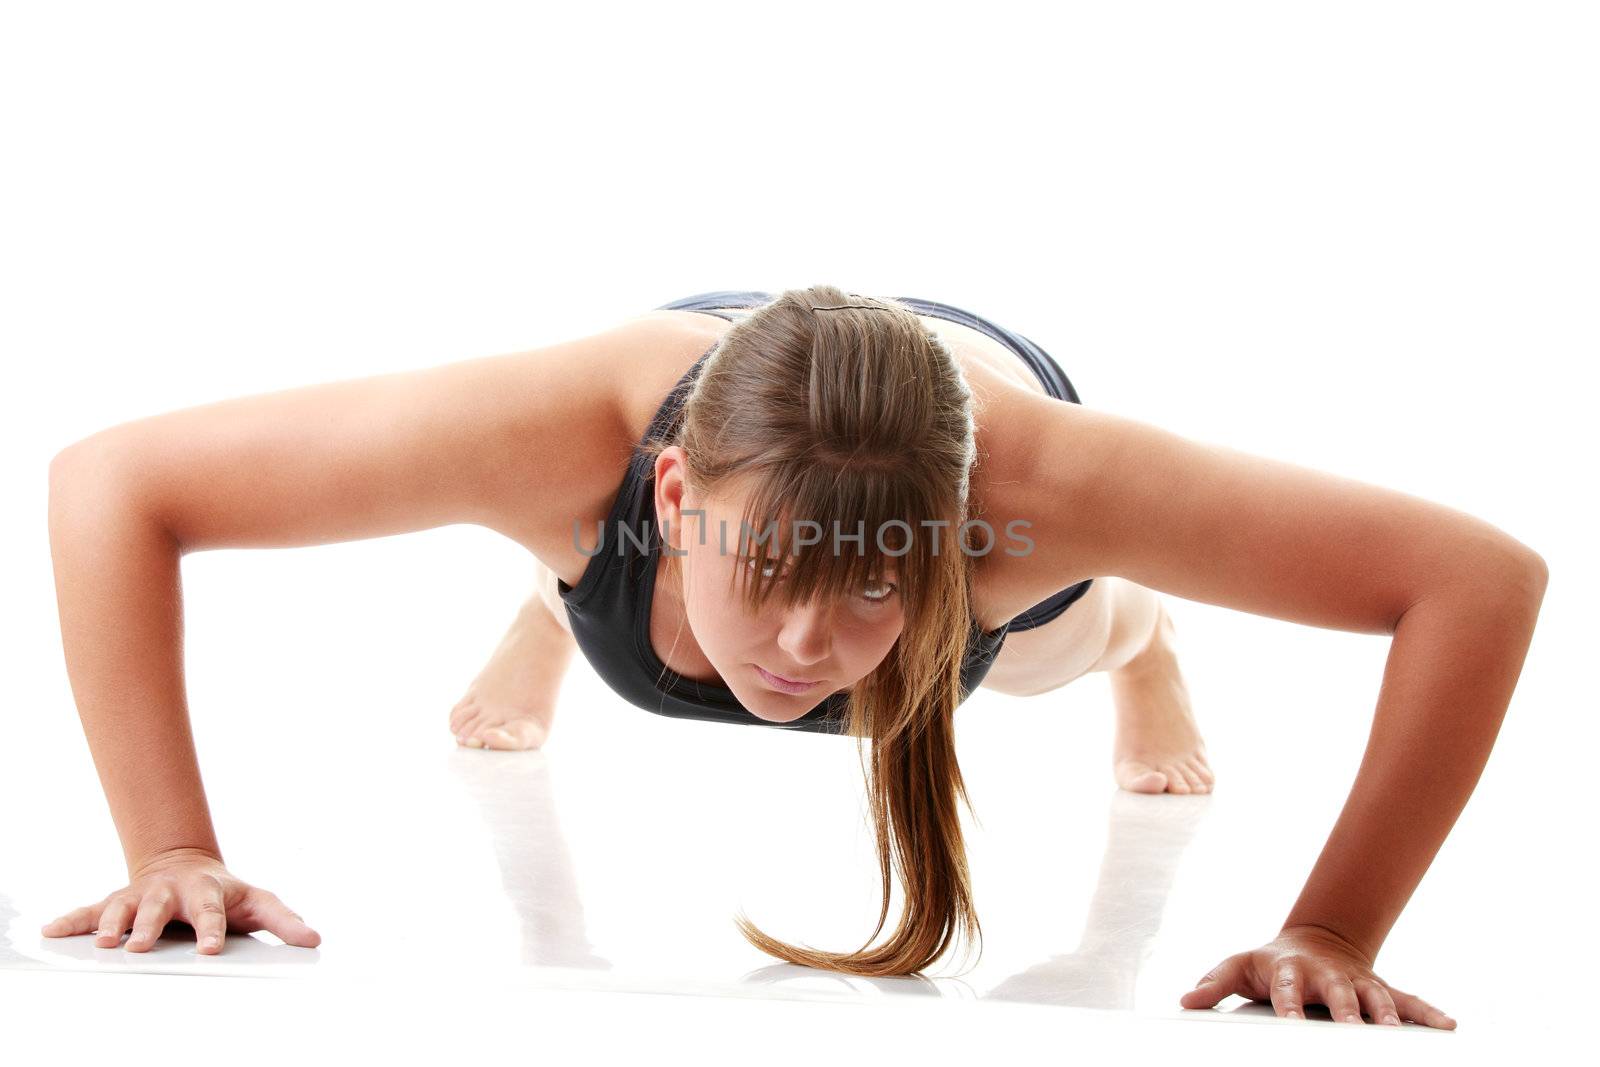 Relaxed fit woman doing exercise, isolated on white background.